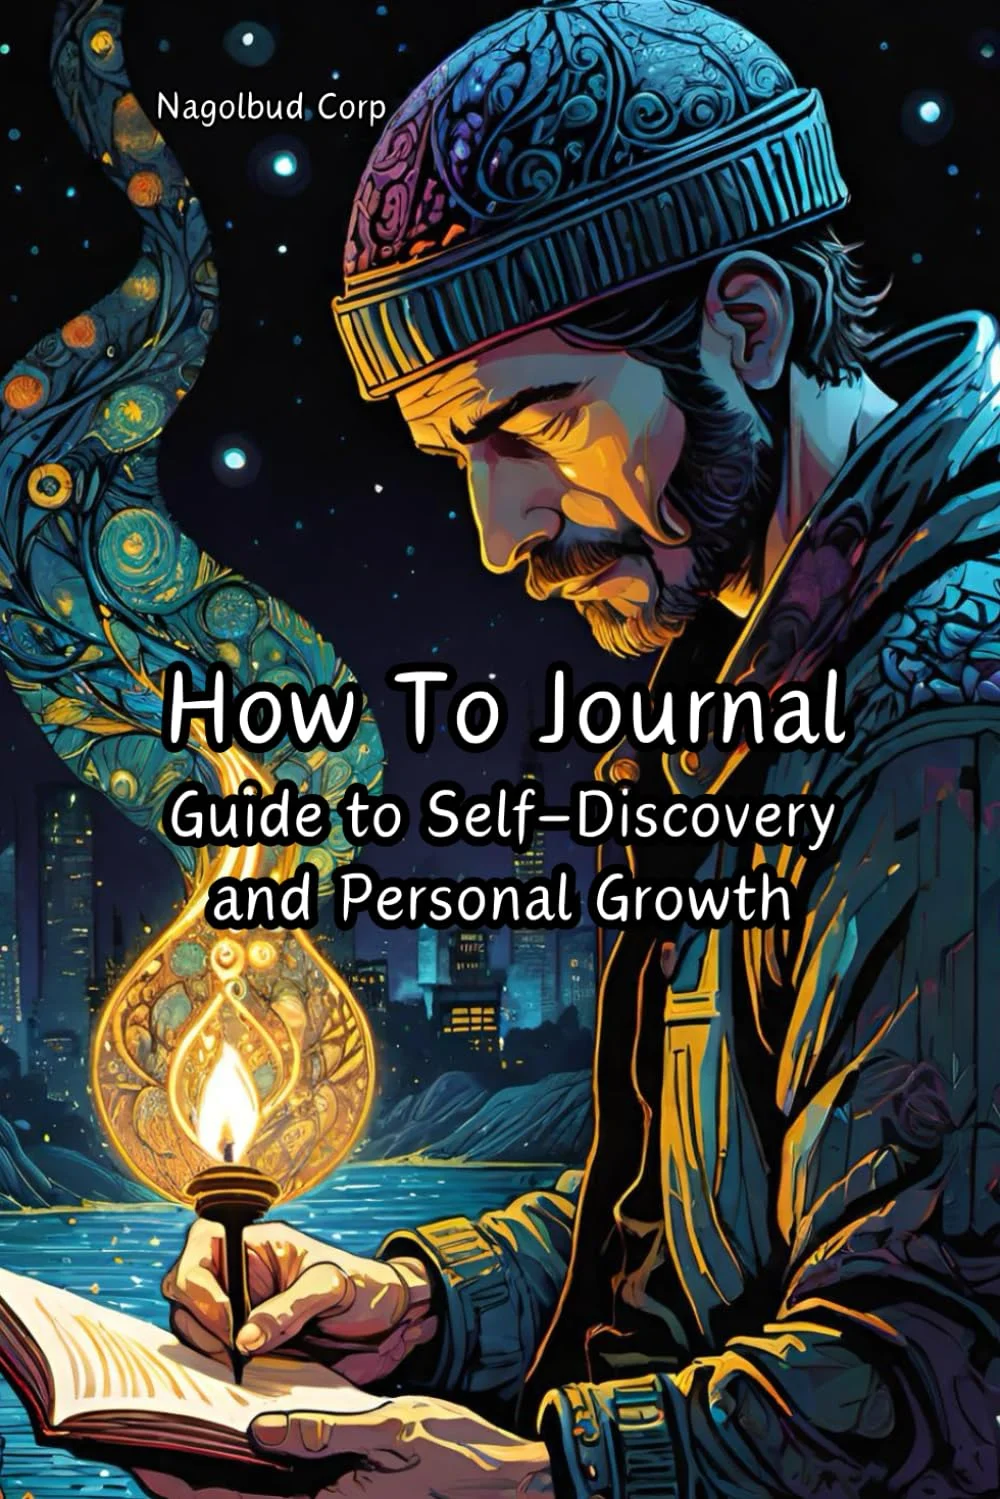 How To Journal Guide to Self-Discovery and Personal Growth